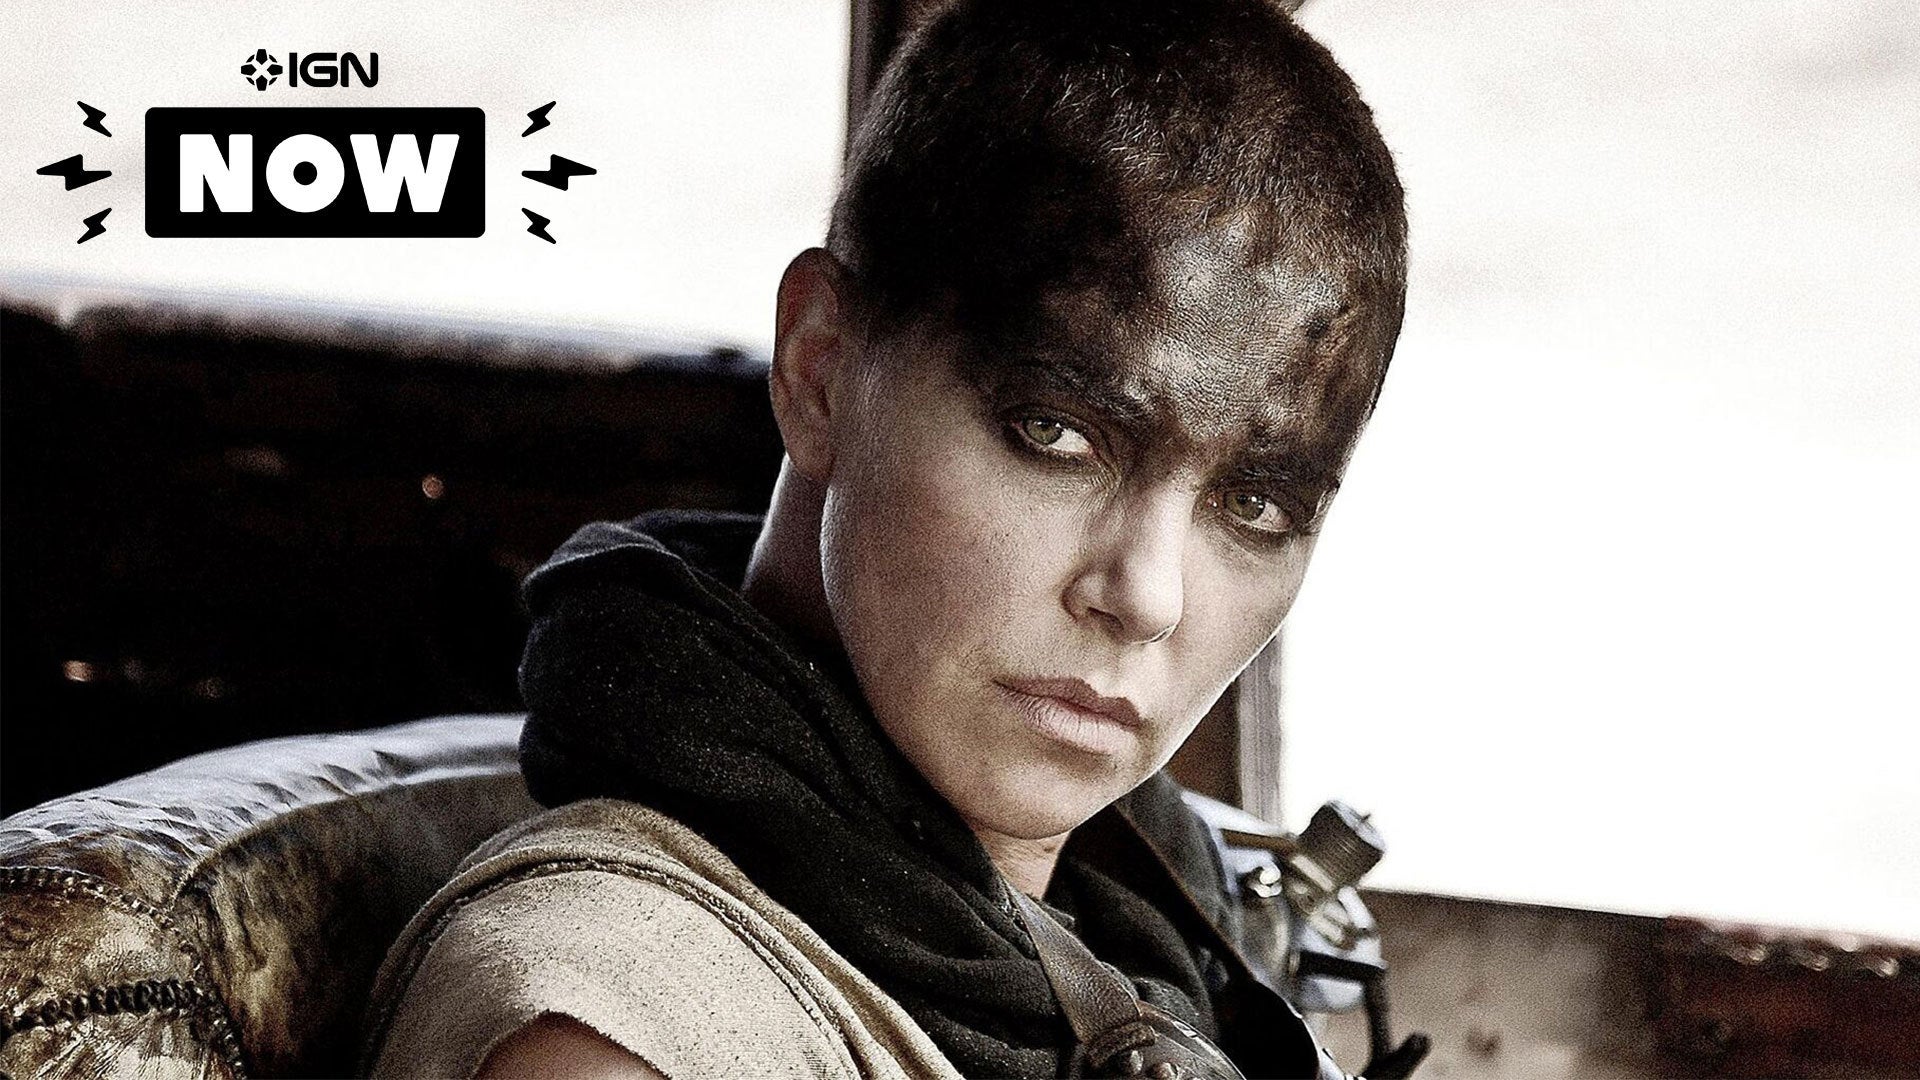 Mad Max: Charlize Theron on 'Heartbreaking' Recasting of Furiosa - IGN Now